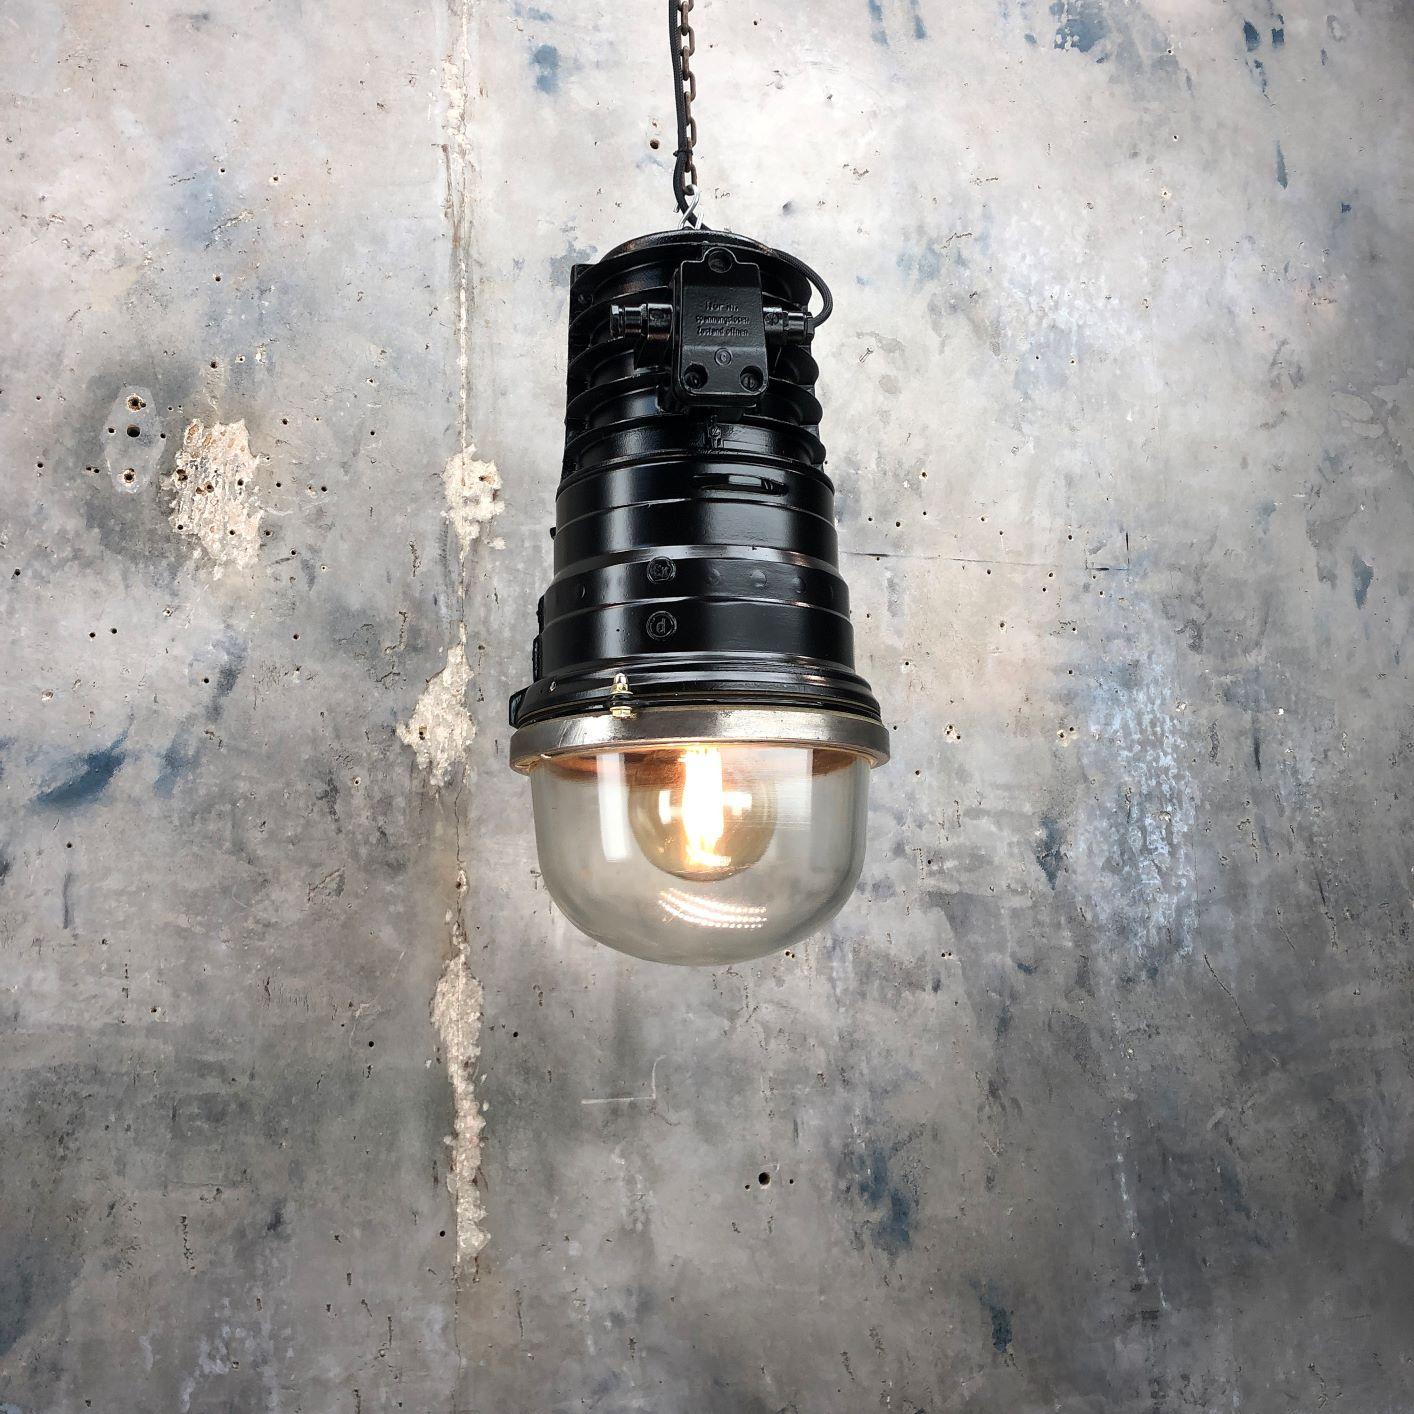 1970s Vintage Industrial Black Explosion Proof Ceiling Pendant by EOW For Sale 4